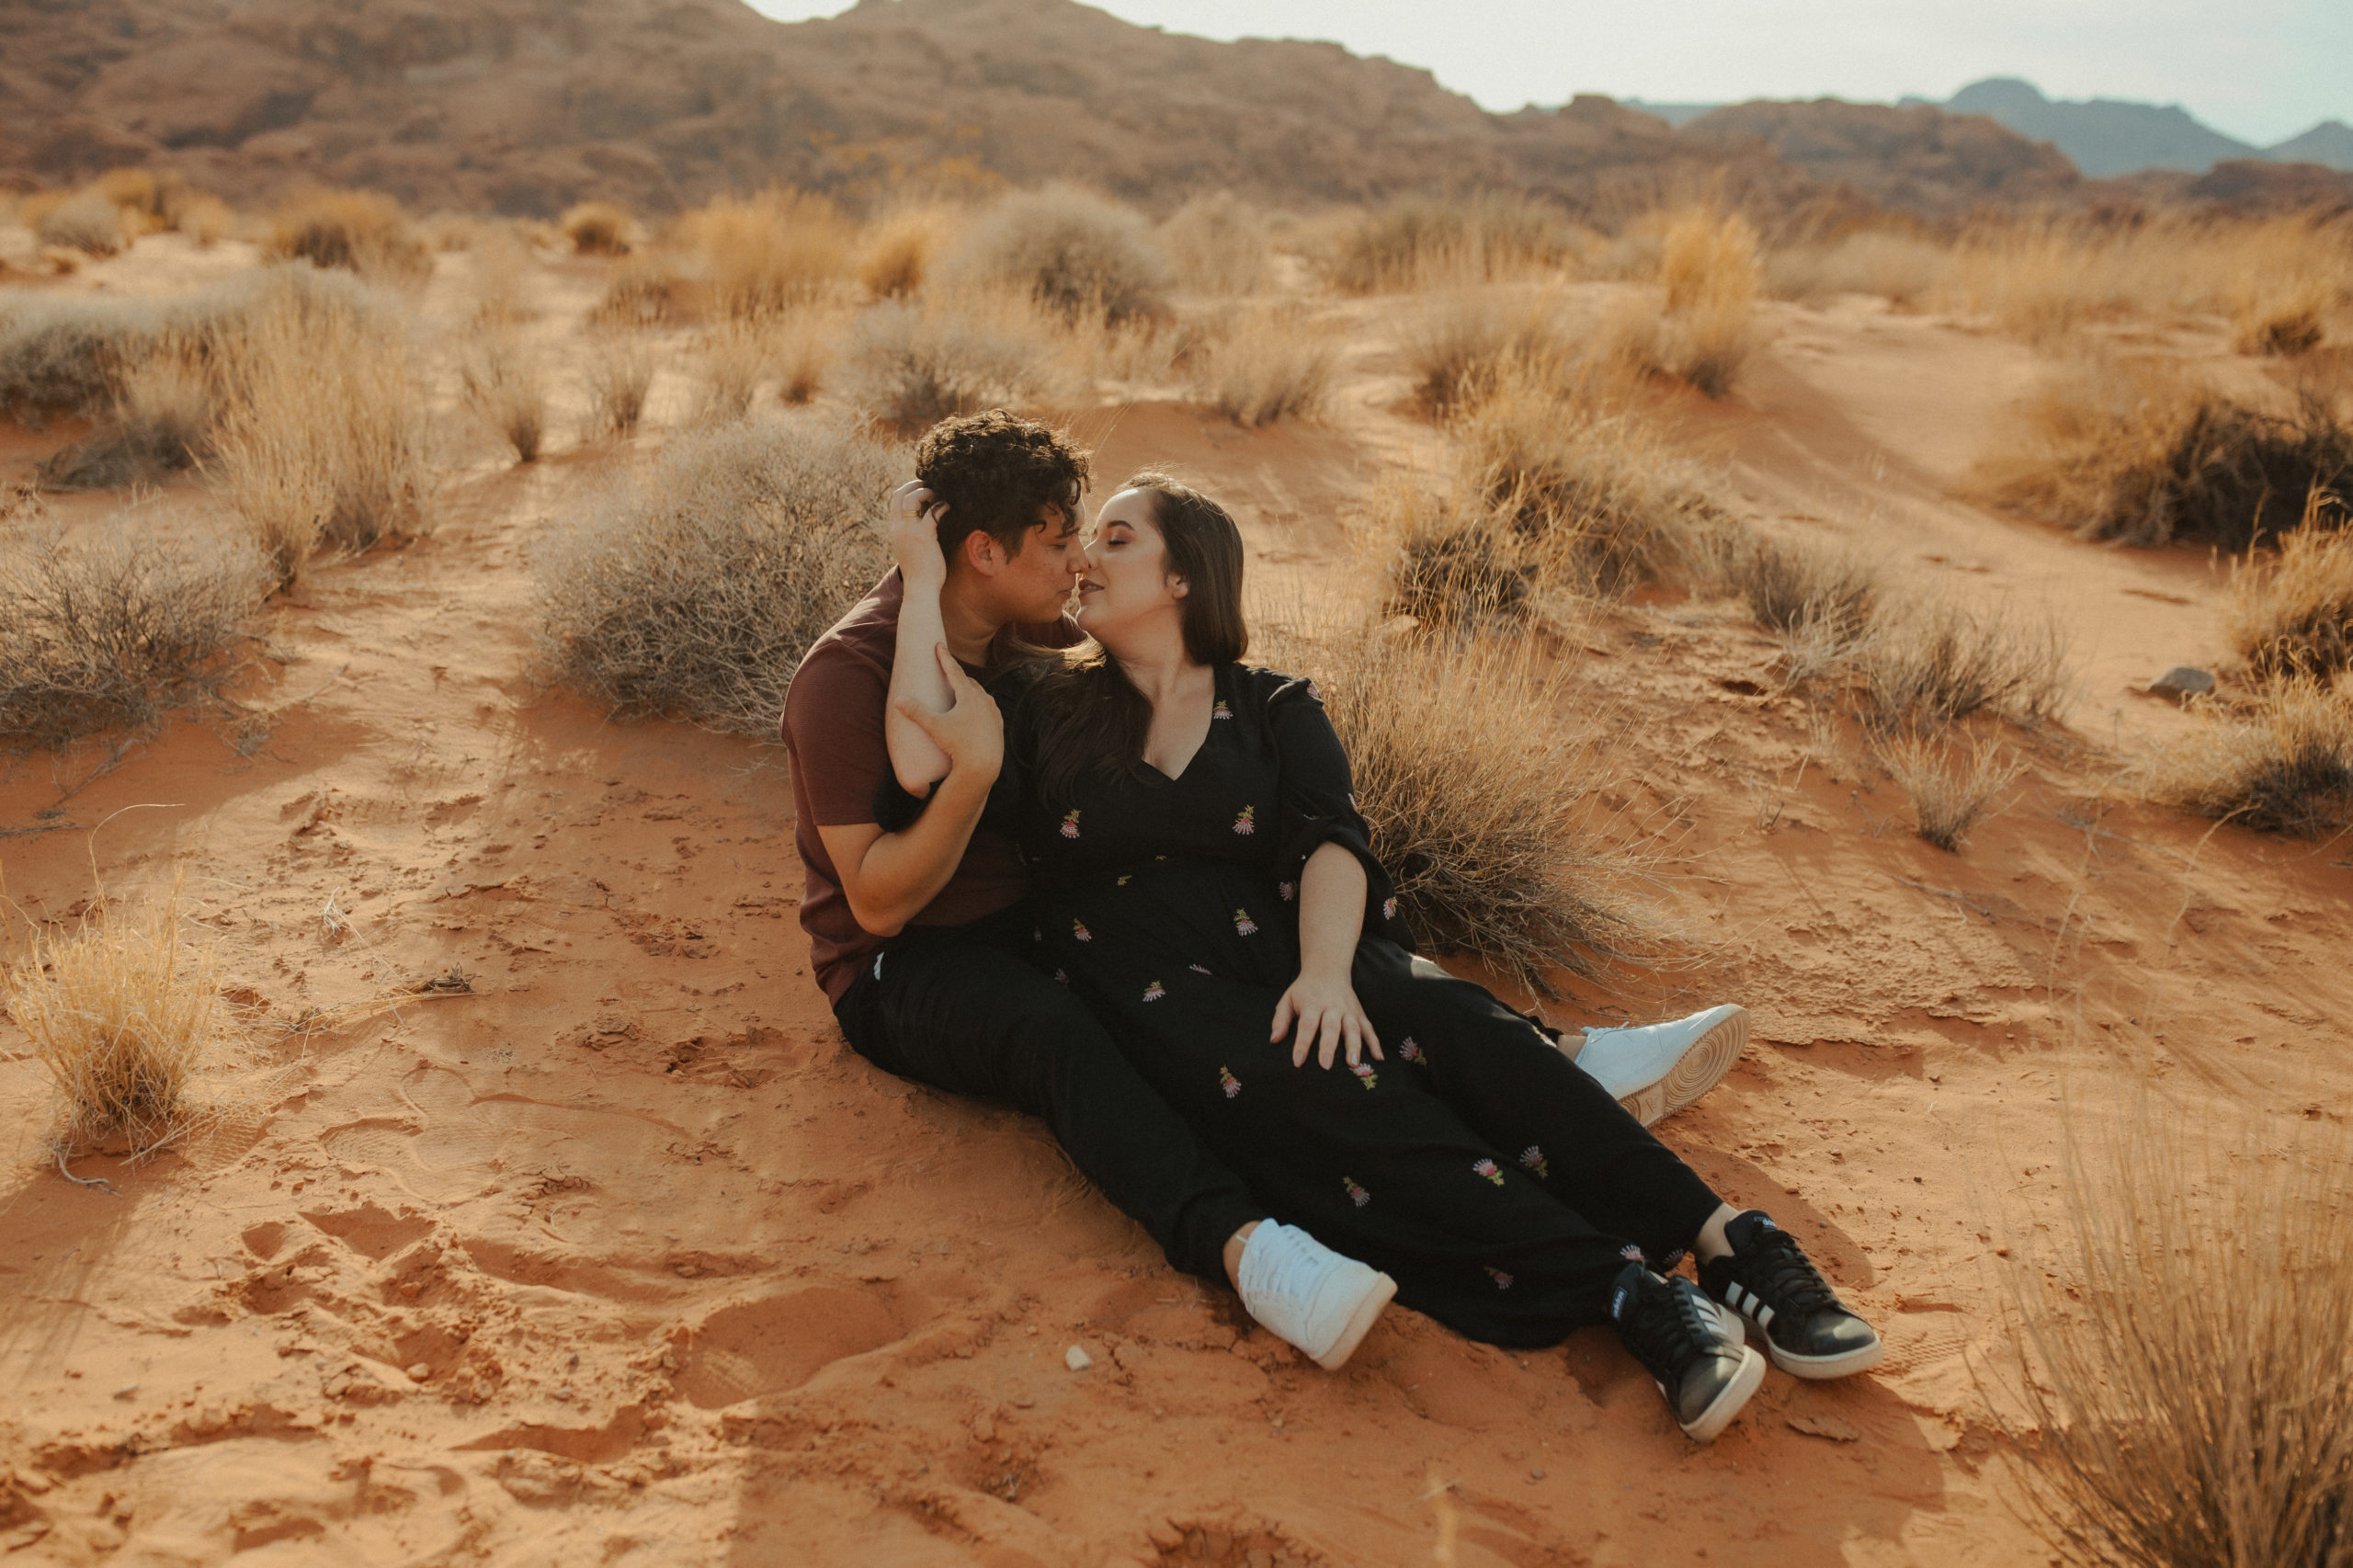 Couple sitting together on the ground in the desert